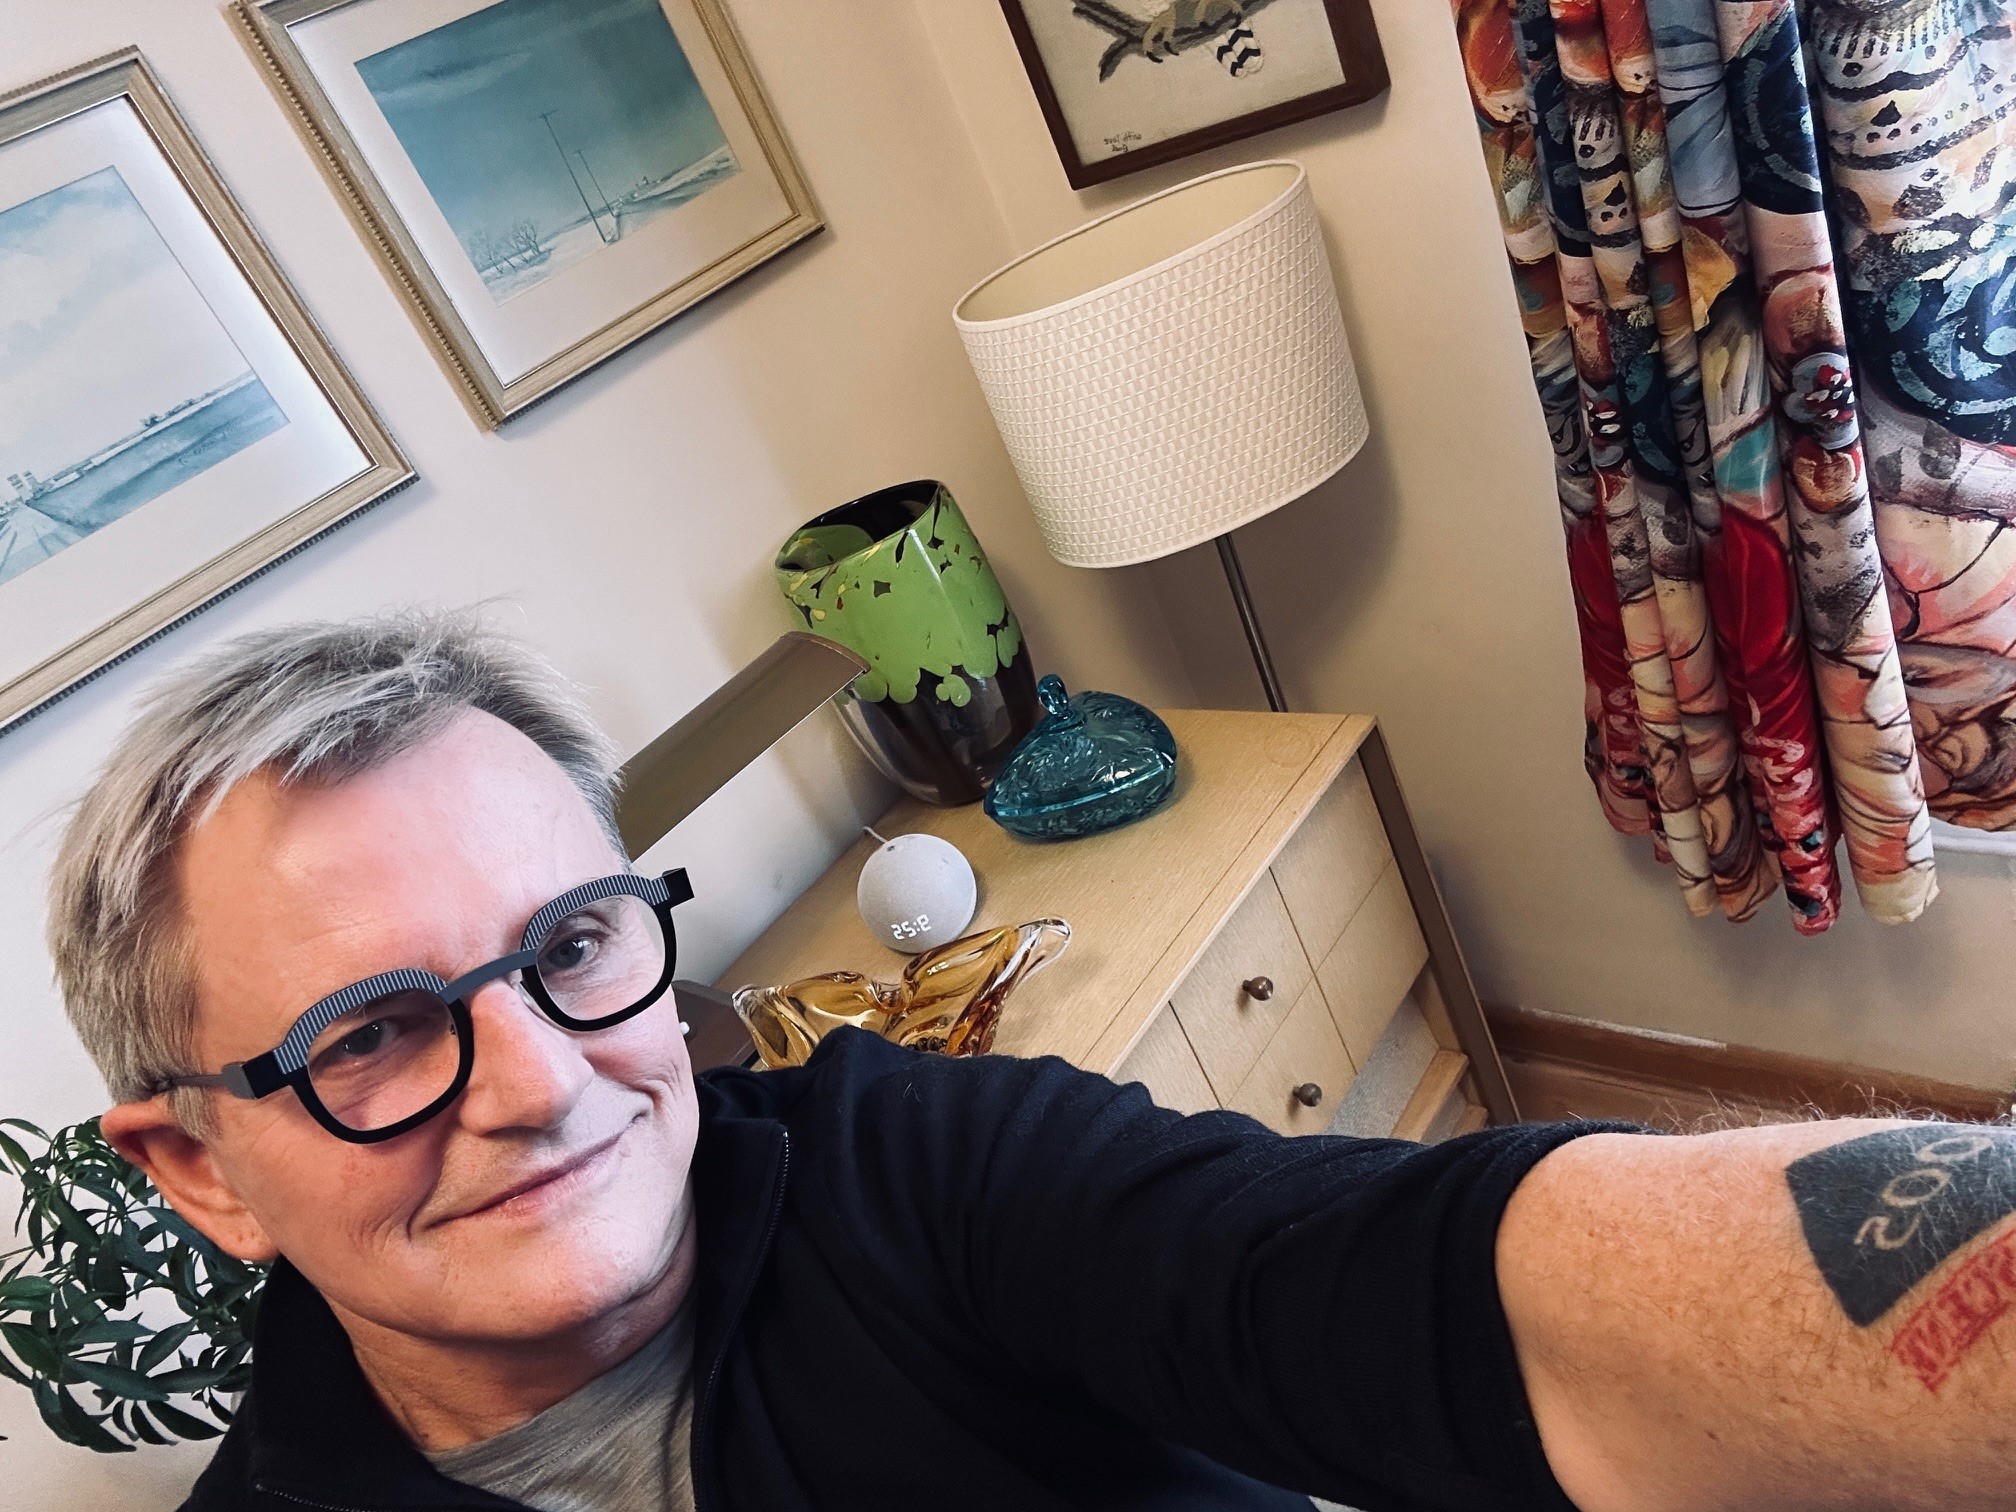 Dennis Sumara smiles wearing glasses with a vase, lamp, and dresser visible in the background.